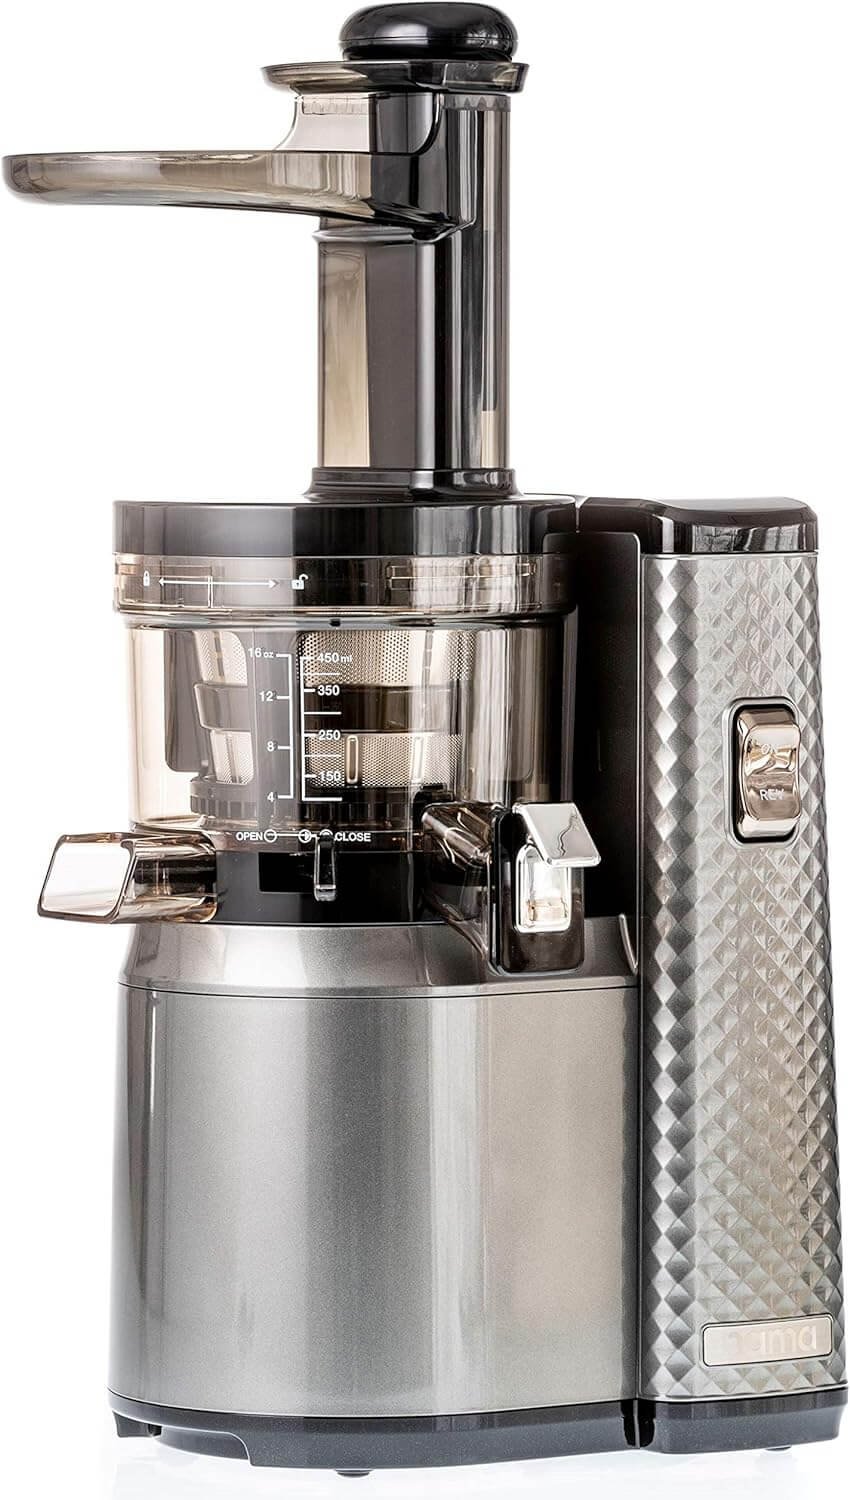 Embrace whole-food juicing with the Nama Vitality 5800, the juicer for those seeking the highest yield and nutrient preservation from their produce.